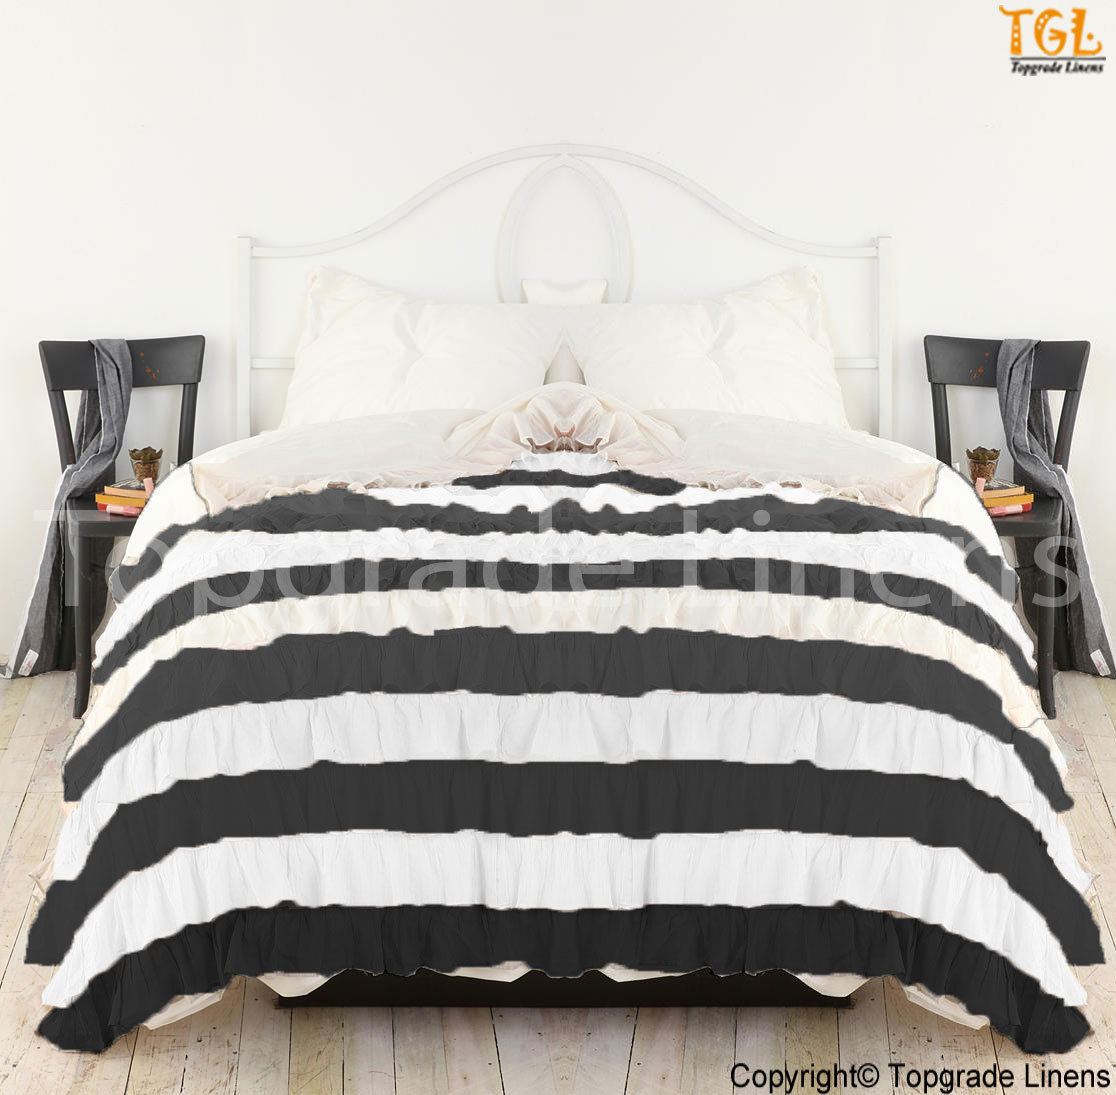 New 1000TC Egyptian Cotton Waterfall Twin Color Ruffle Duvet Cover - All Sizes - $159.99